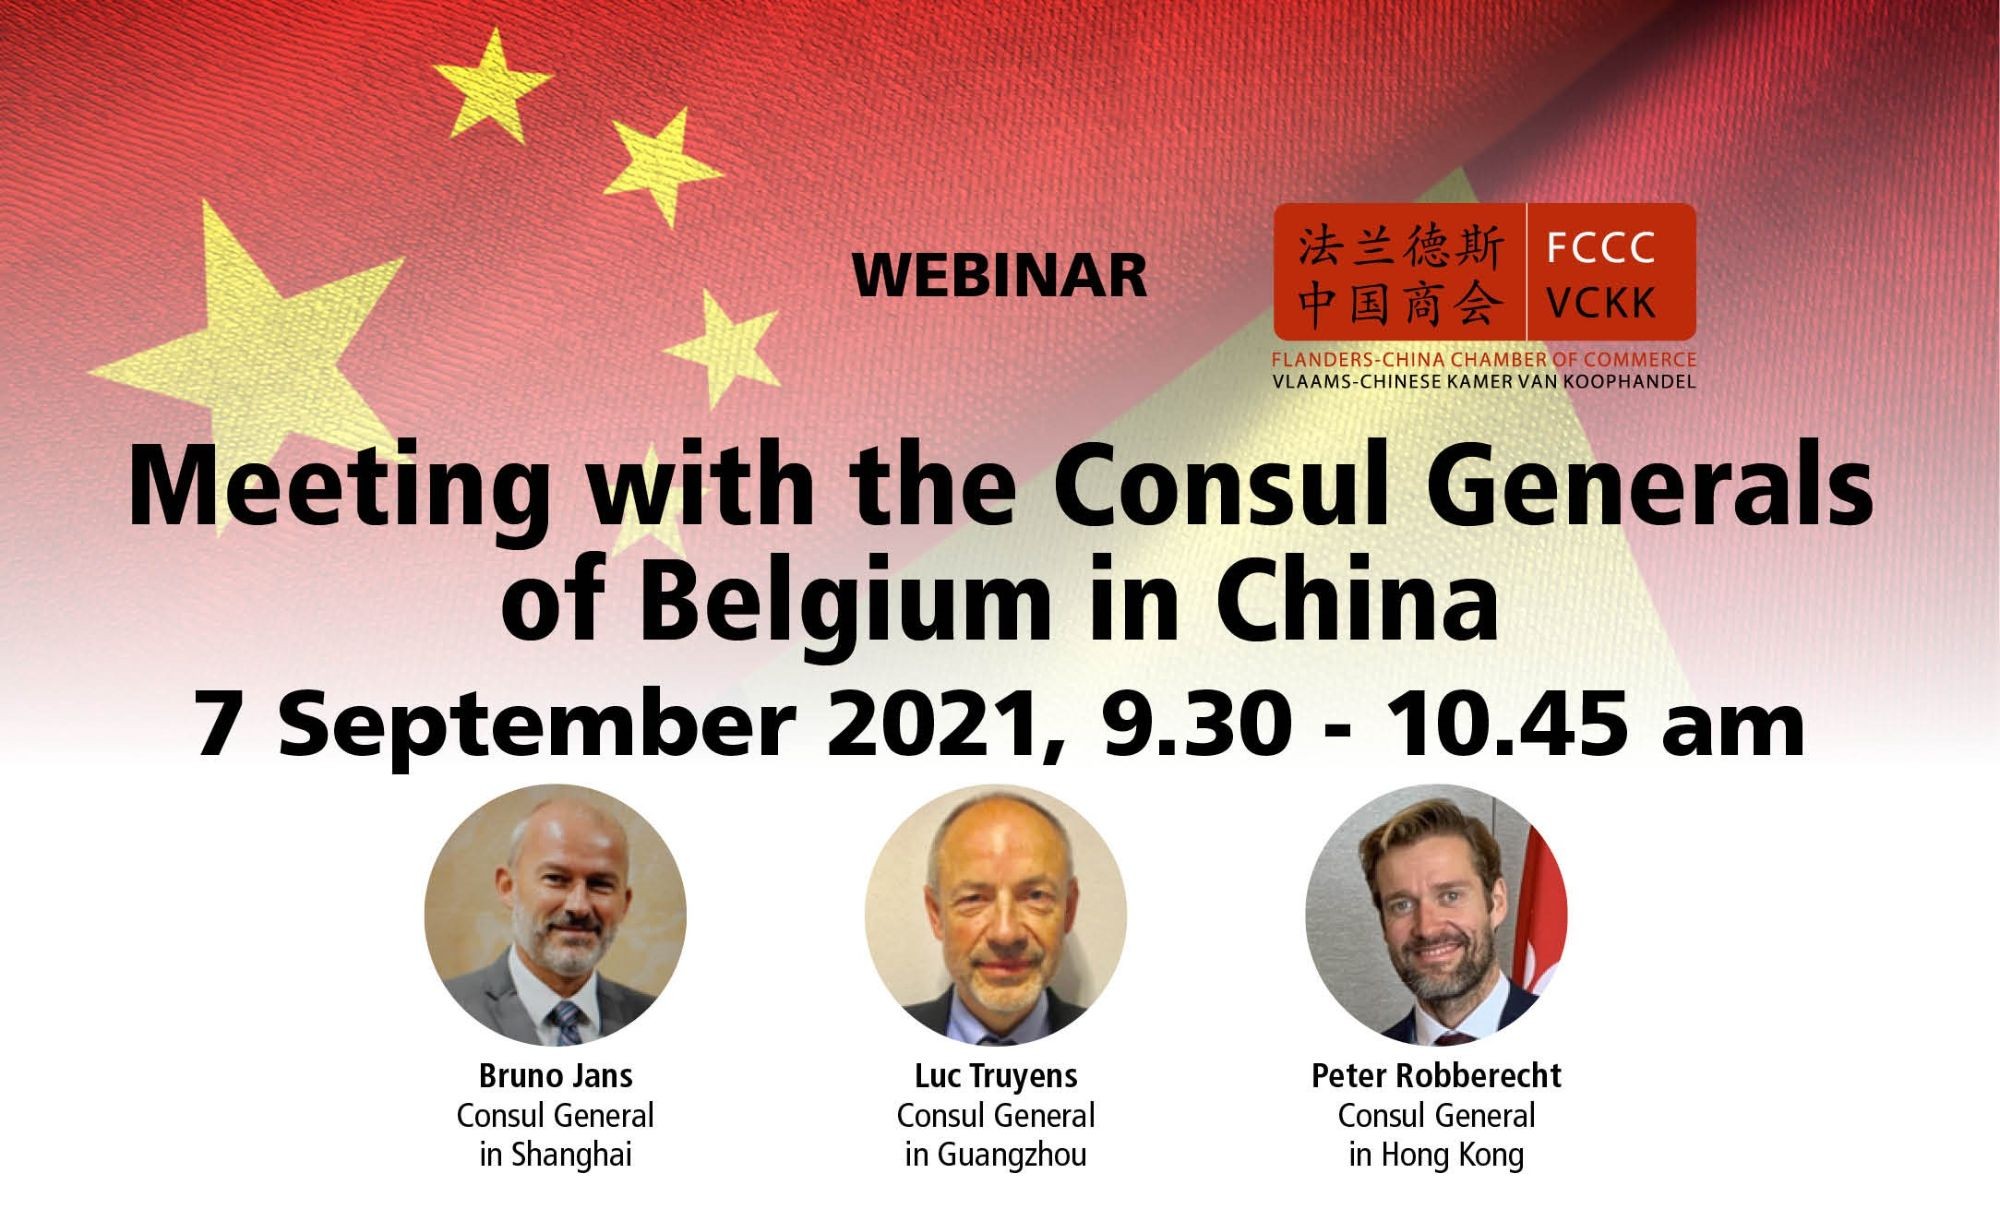 Webinar: Meeting with the Consul Generals of Belgium in China